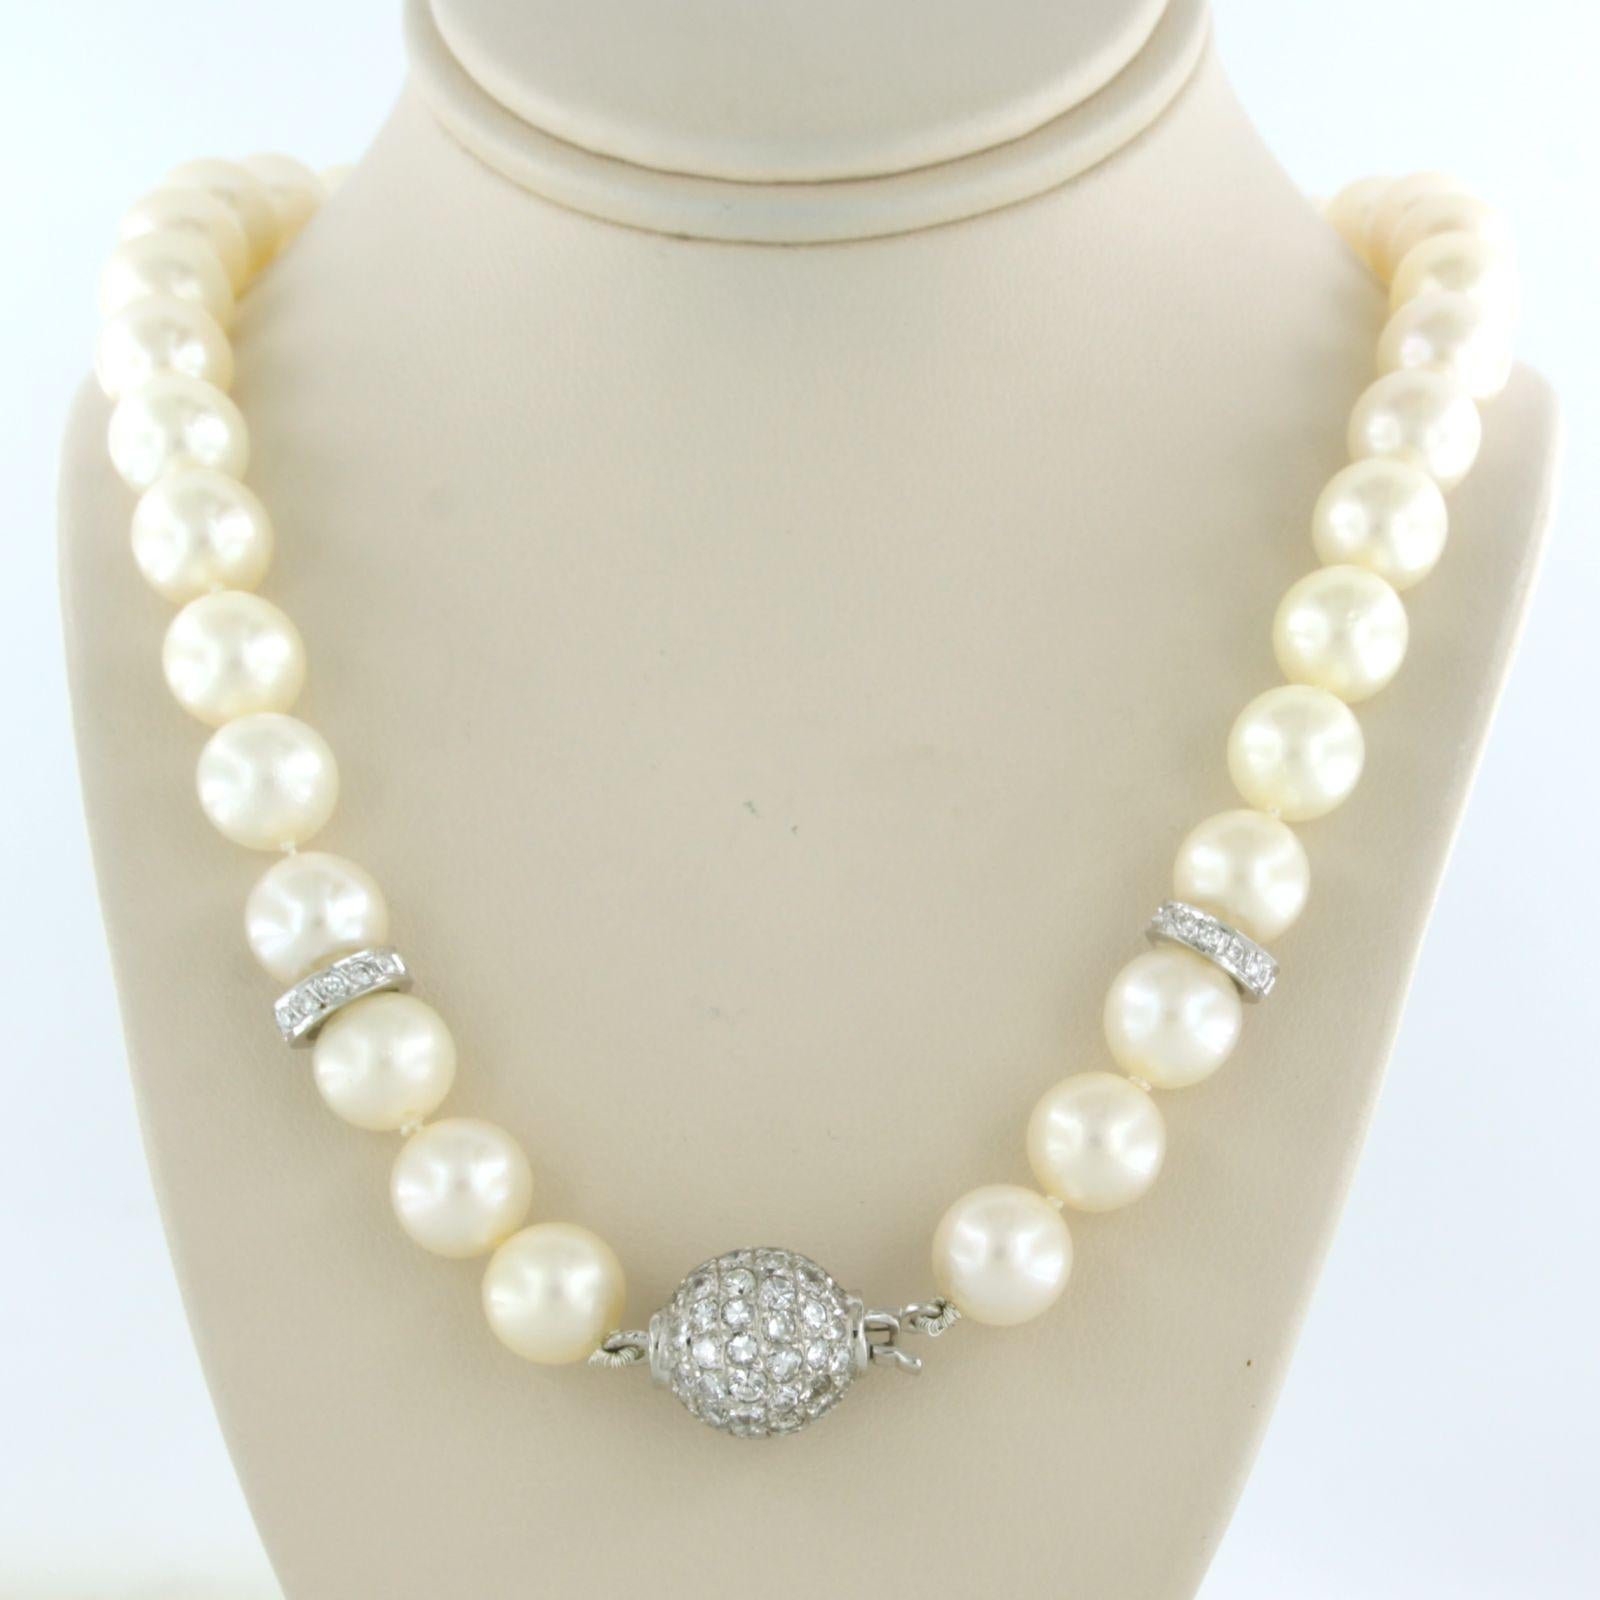 Pearl necklace with 18k white gold lock set with brilliant cut diamond 2,20 carat F/G VS/SI - length 45 cm

detailed description:

the length of the necklace is 45 cm long

the size of the lock is 1.7 cm long by 1.1 cm wide

Total weight 46.8